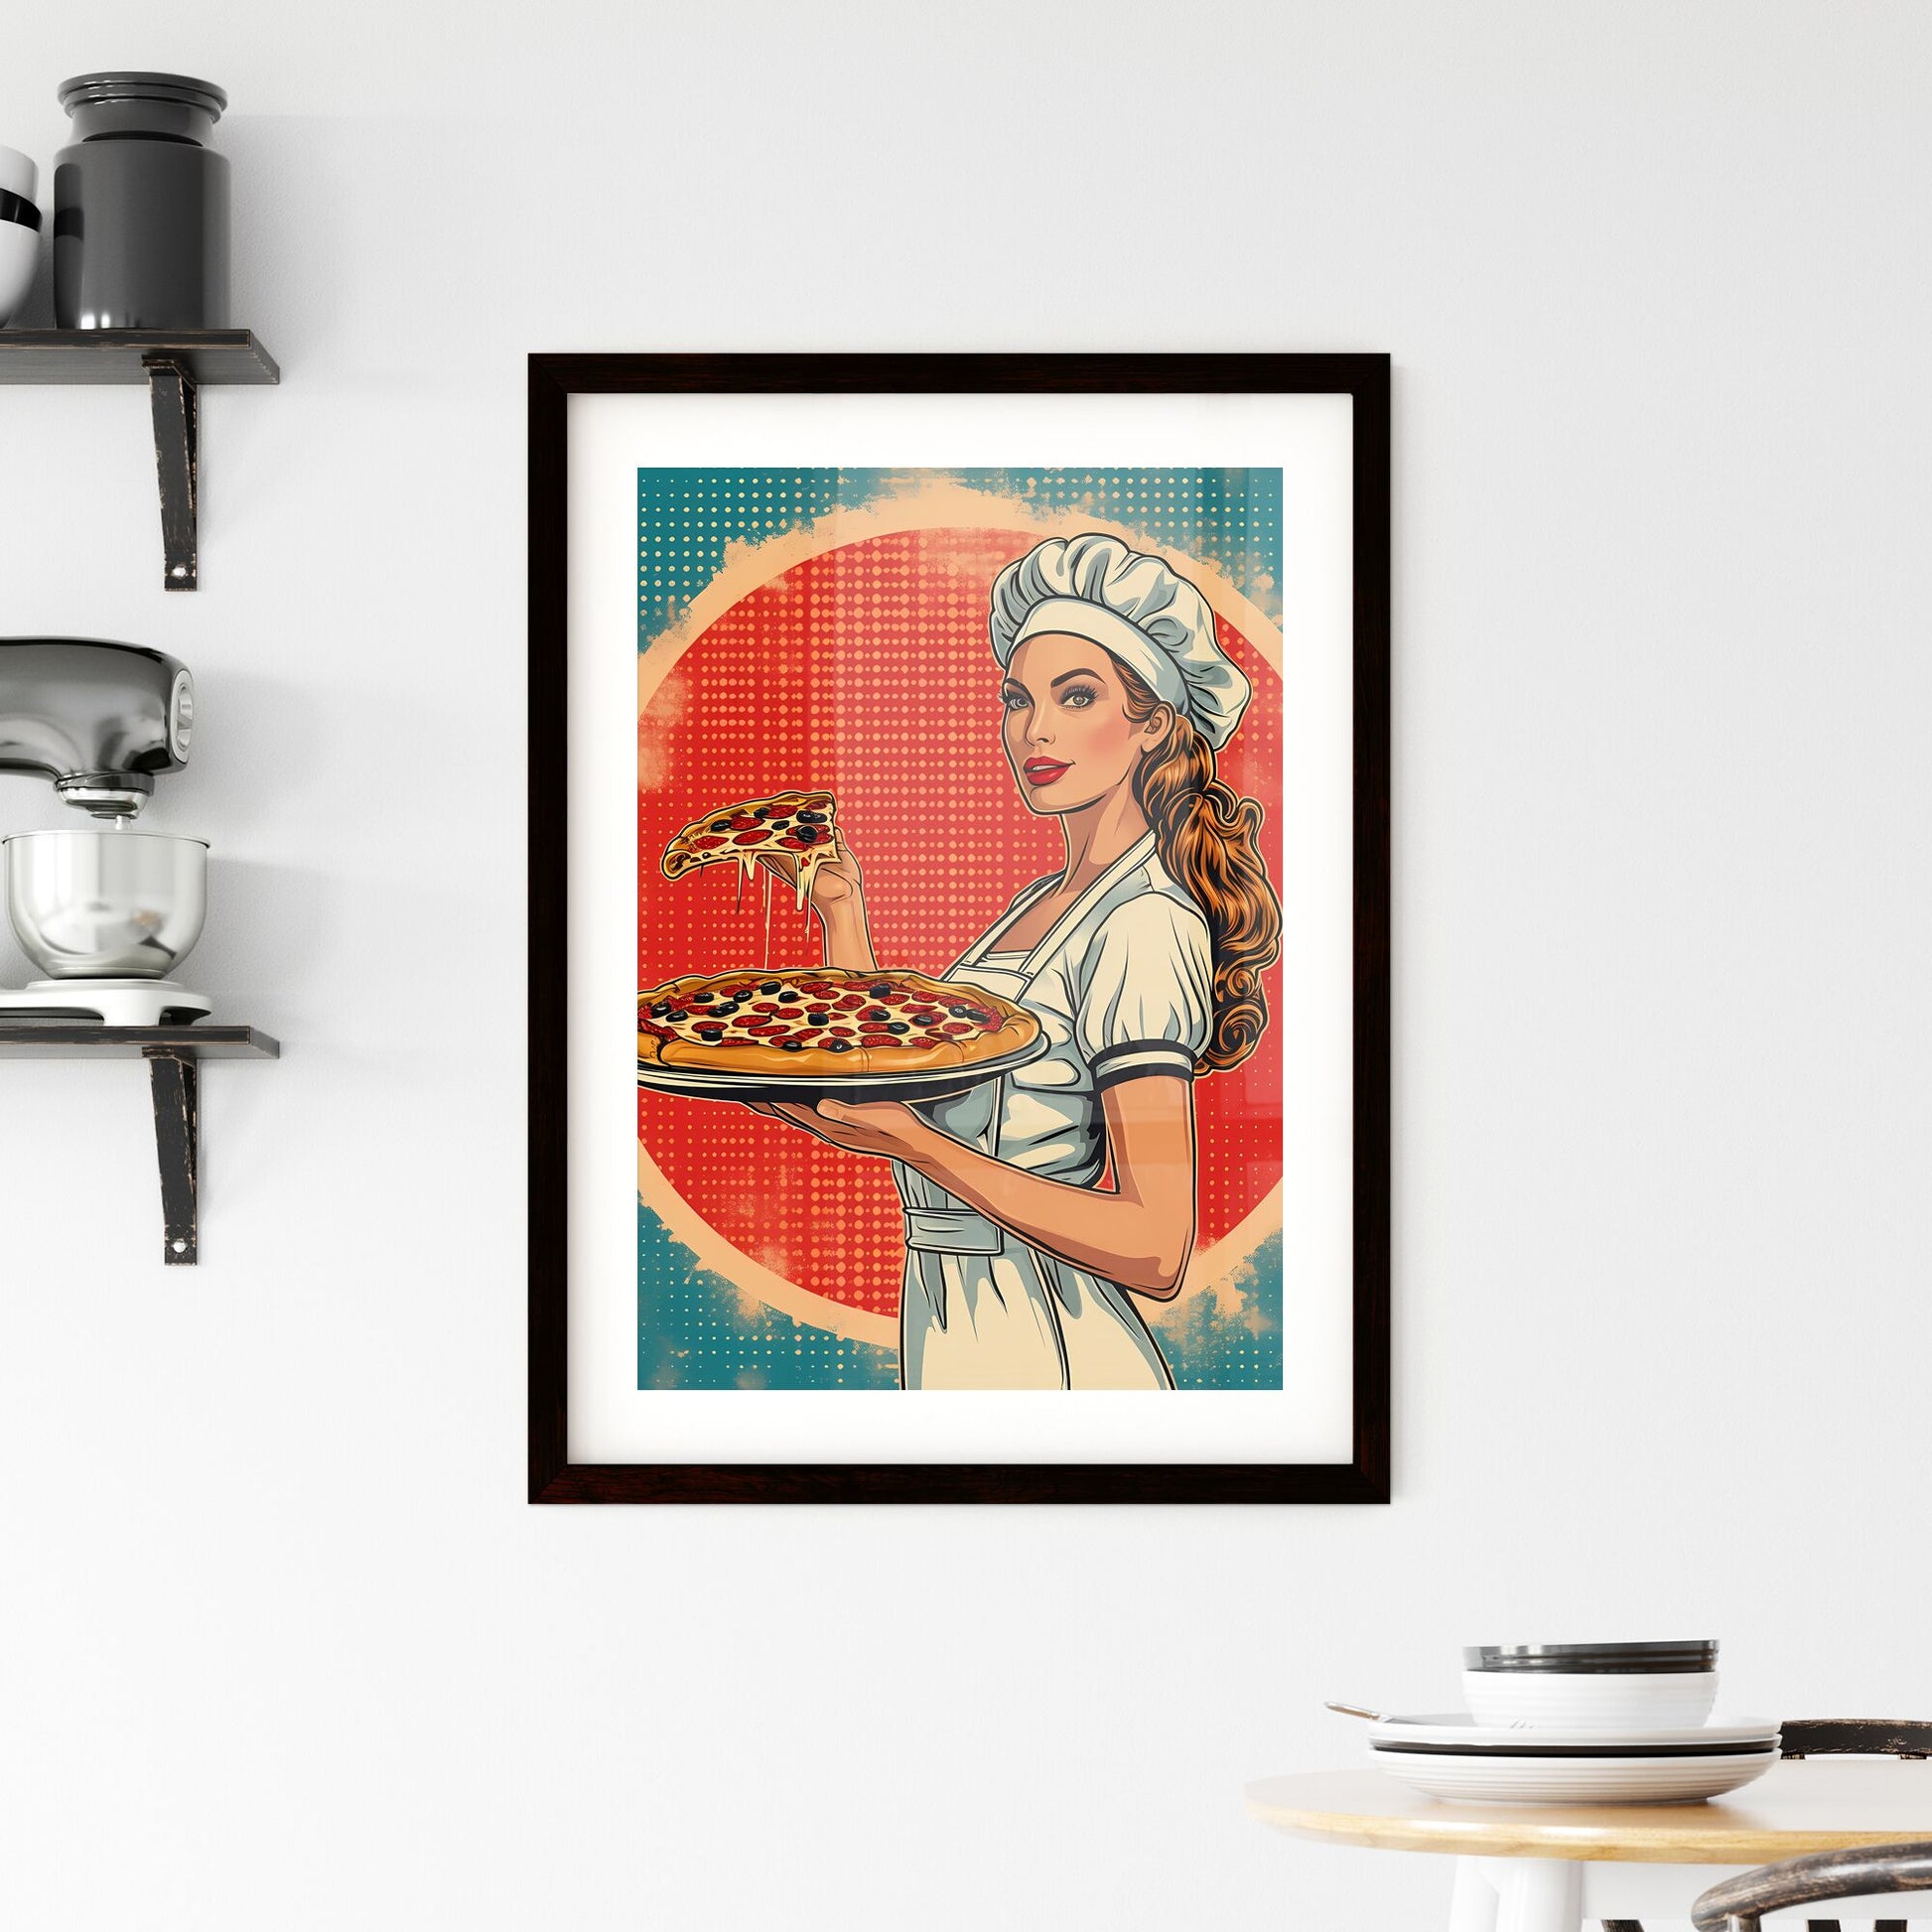 Pizza chef - Art print of a woman holding a pizza Default Title